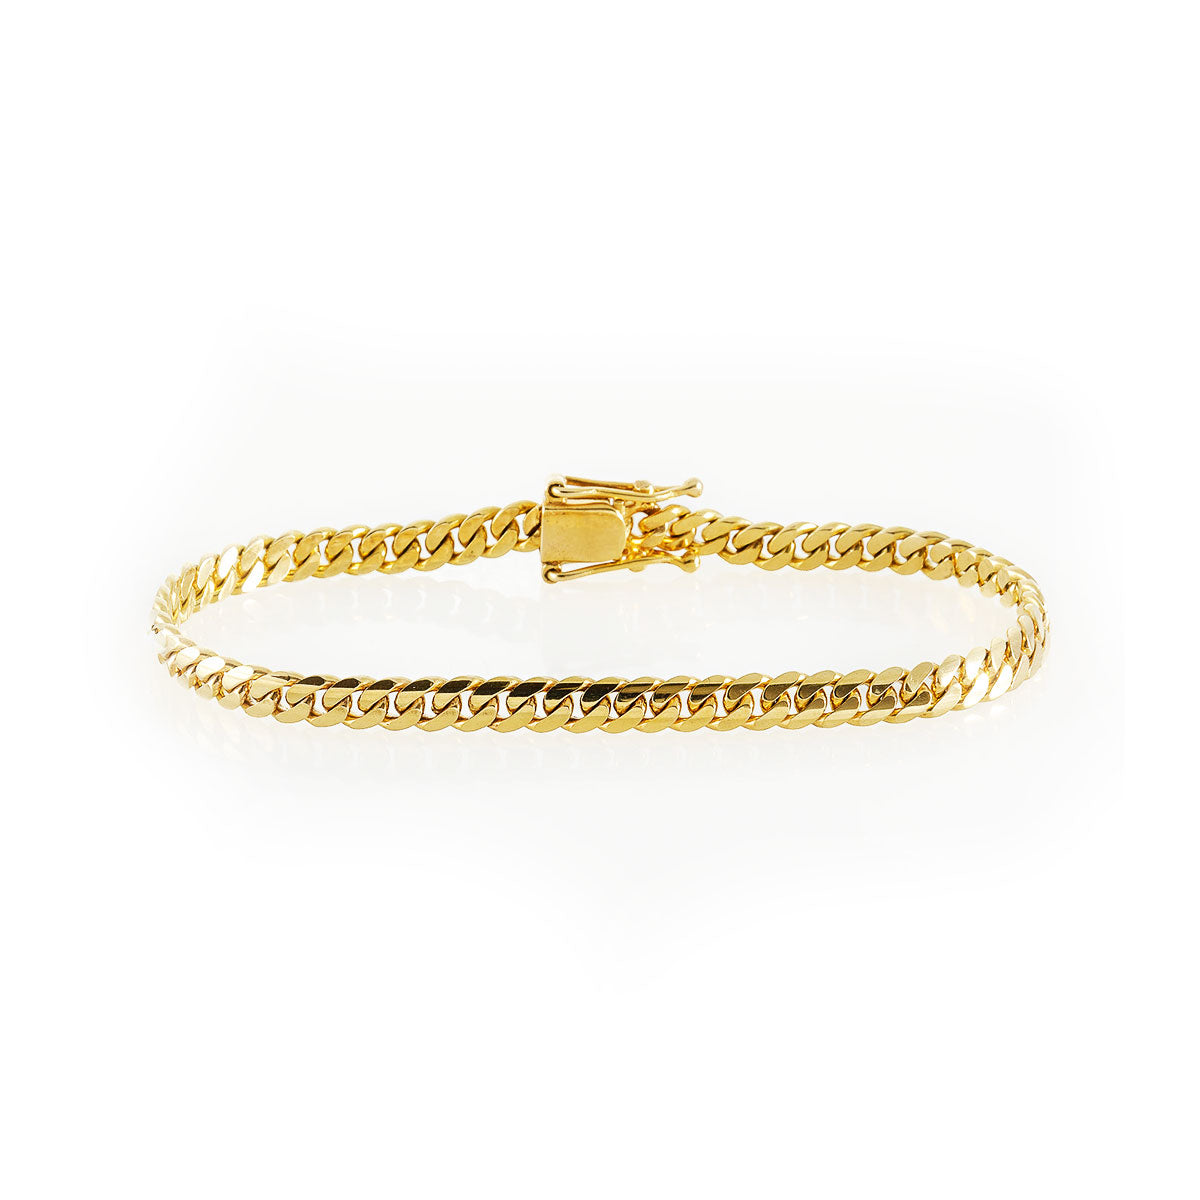 Handmade Solid Gold Miami Cuban Link Bracelets: Made in Tampa, Florida Yellow / 18kt Gold / 9.0 (X-Large)